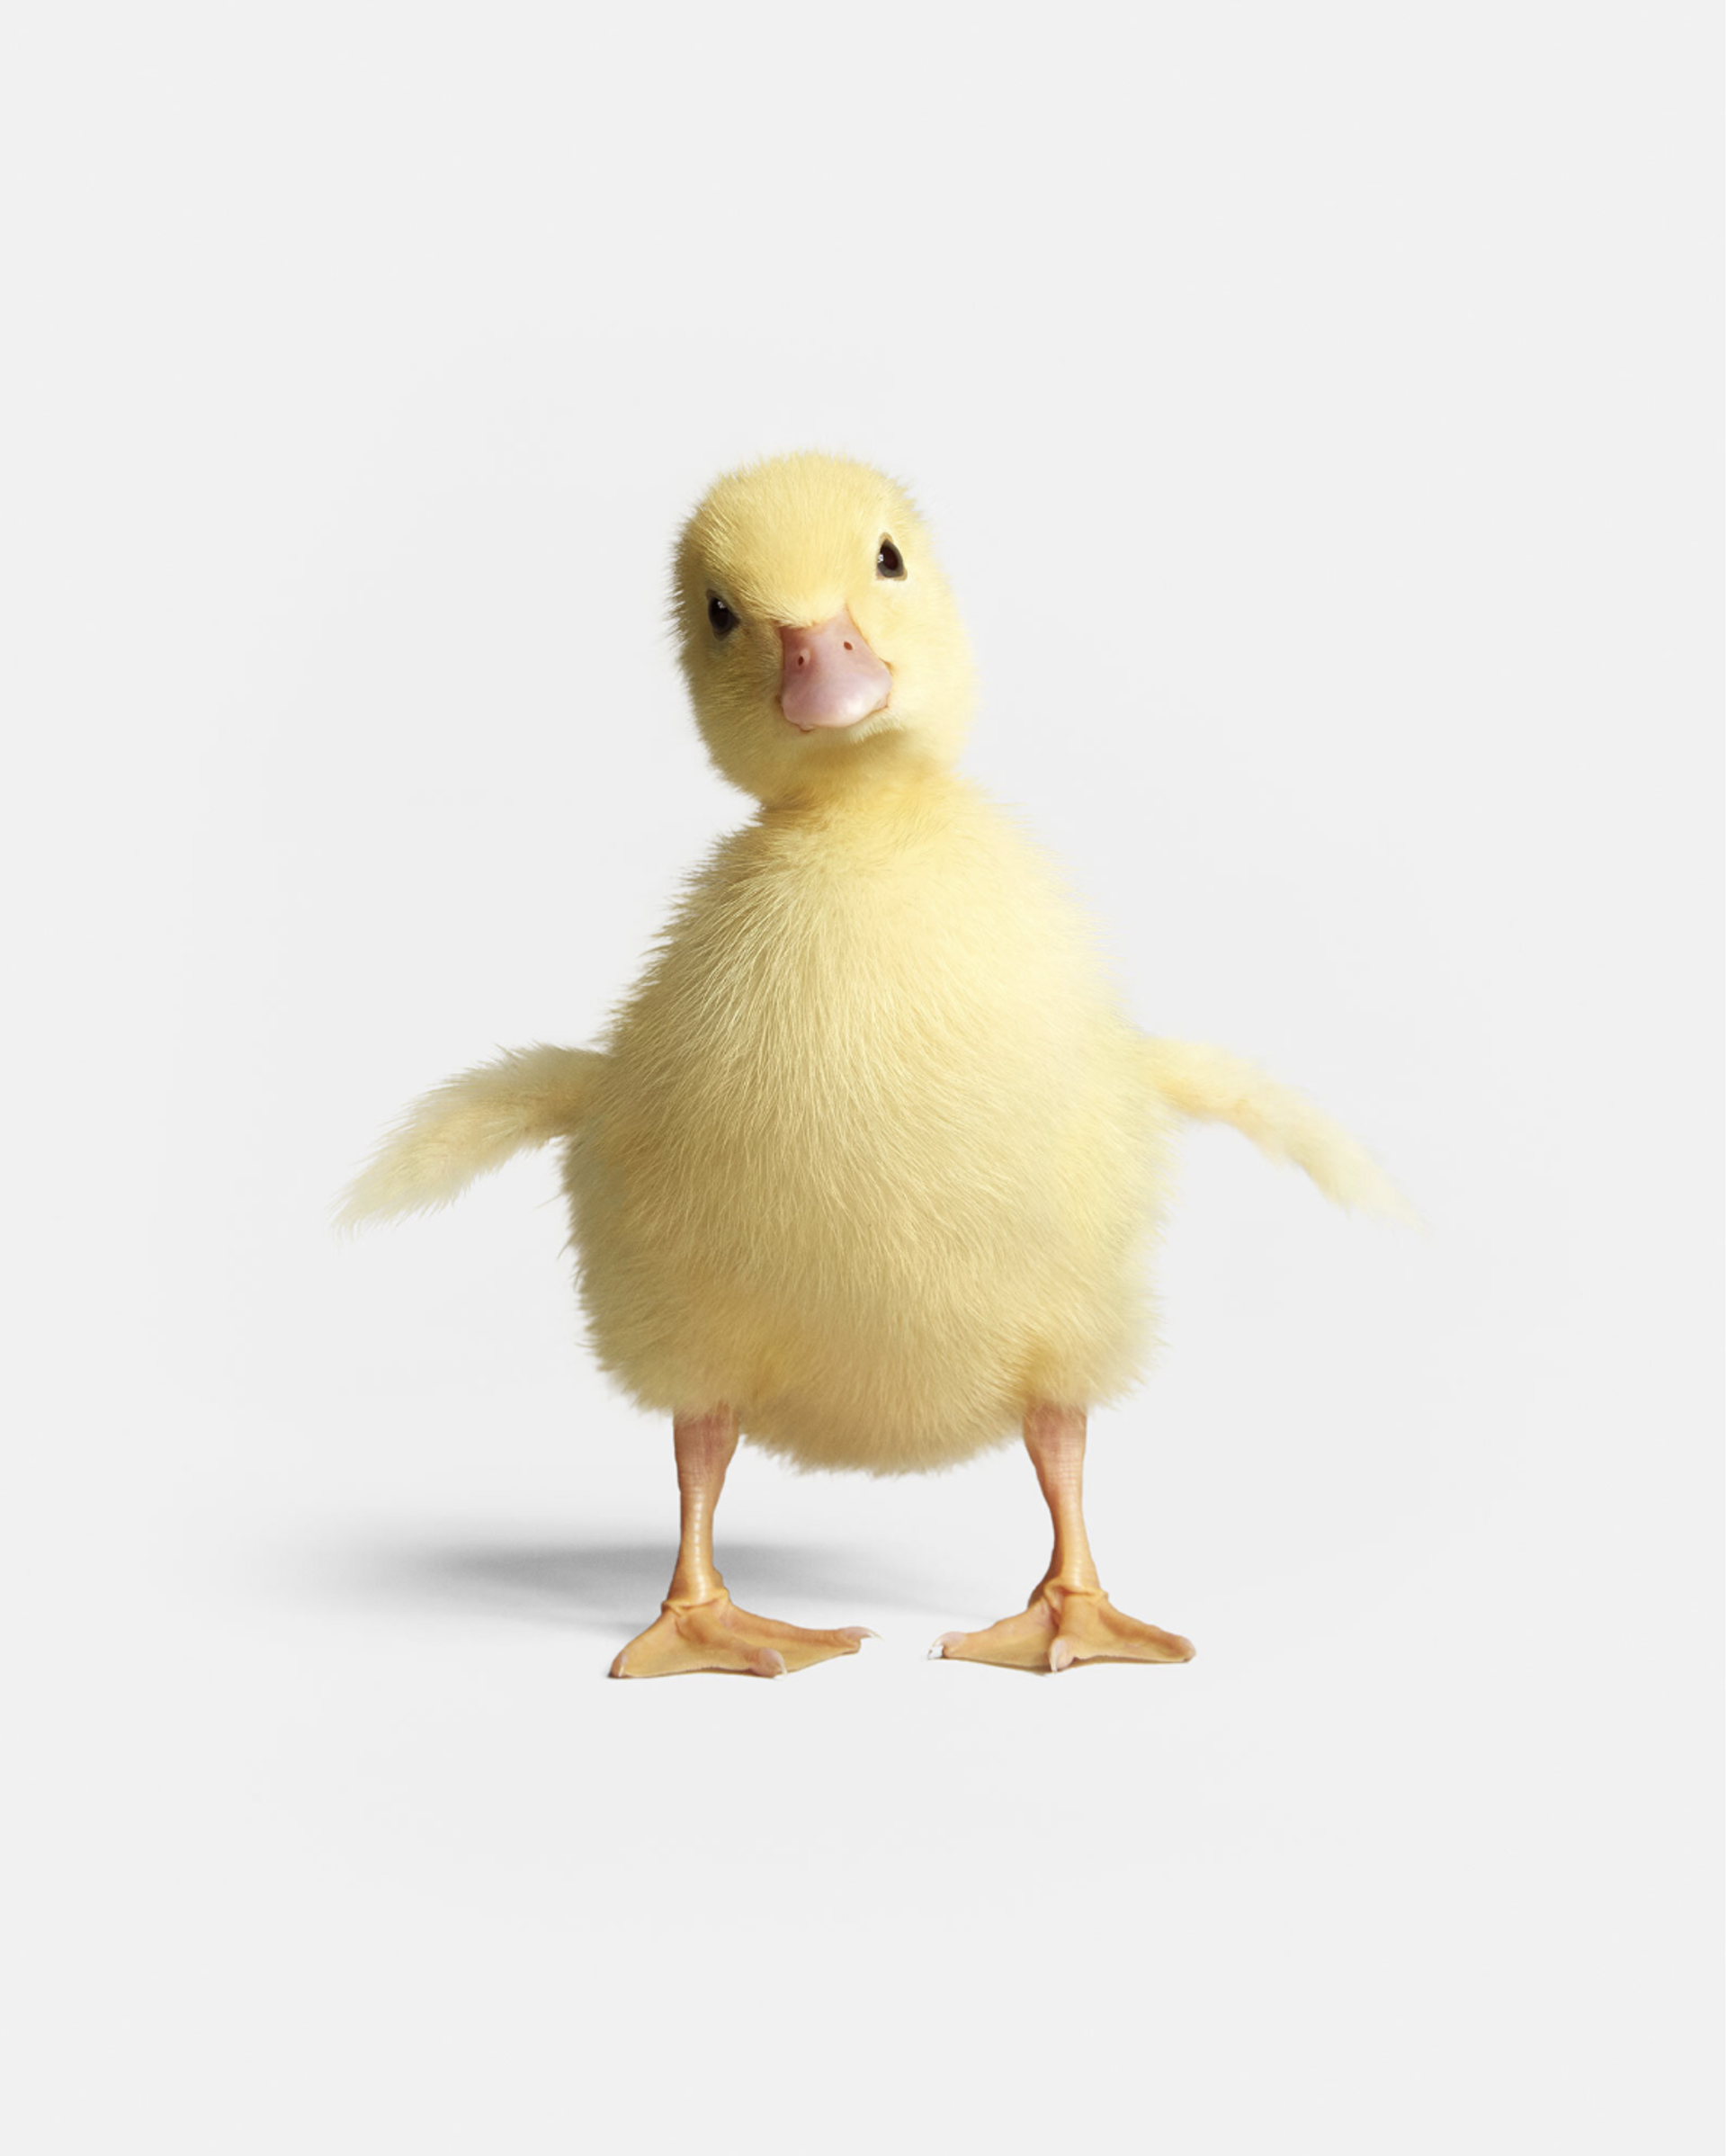 Duckling Portrait by Randal Ford